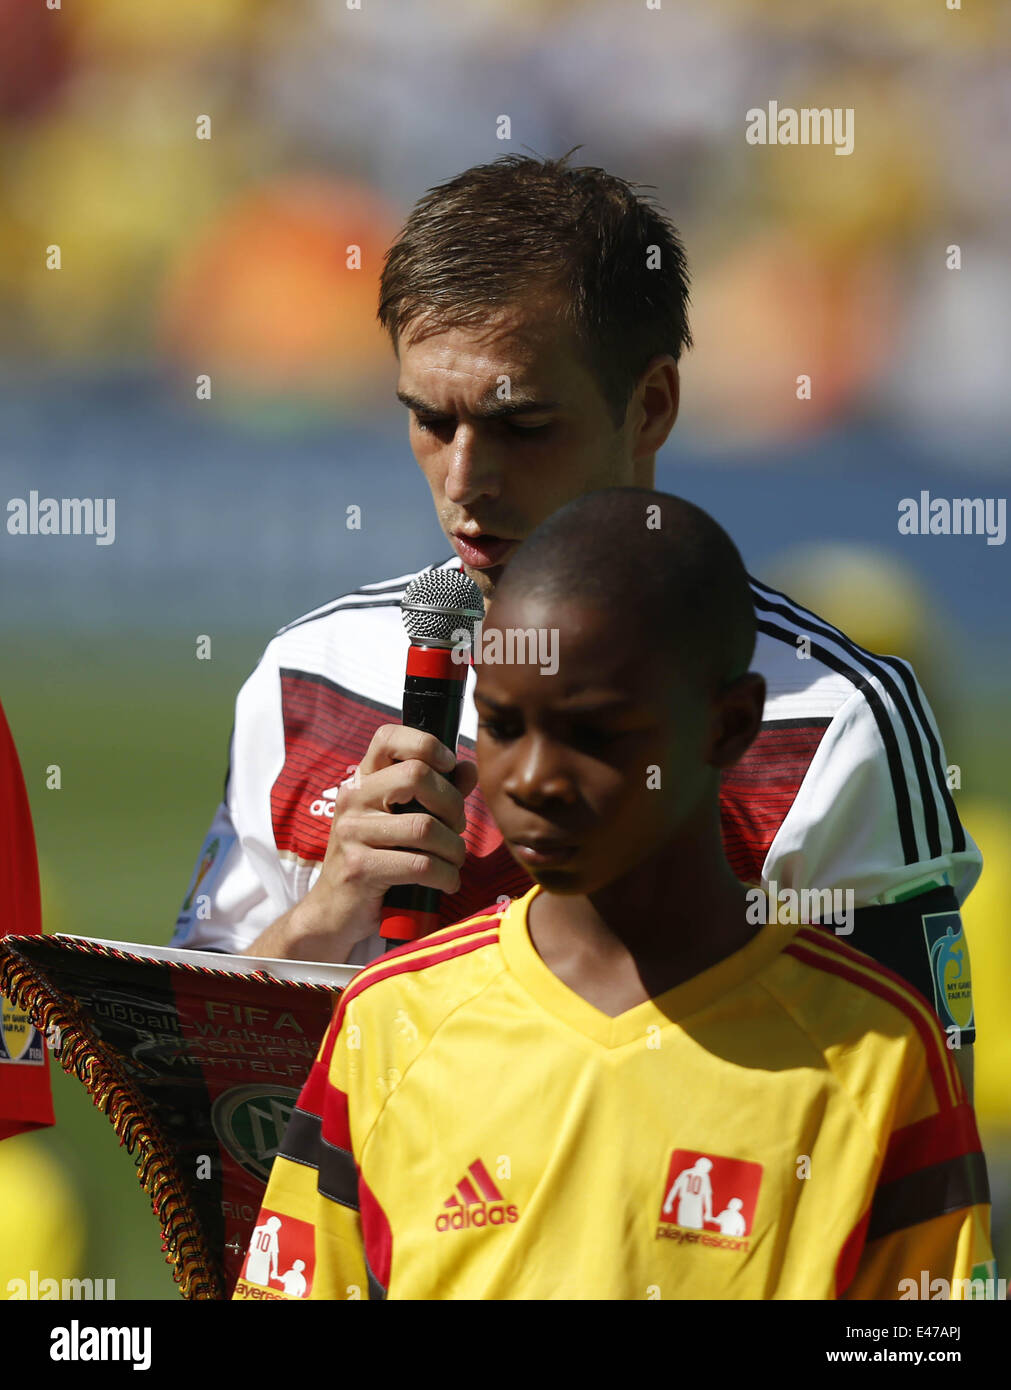 Rio De Janeiro, Brazil. 4th July, 2014. Germany's Philipp Lahm (back) speaks before a quarter-finals match between France and Germany of 2014 FIFA World Cup at the Estadio do Maracana Stadium in Rio de Janeiro, Brazil, on July 4, 2014. Credit:  Wang Lili/Xinhua/Alamy Live News Stock Photo